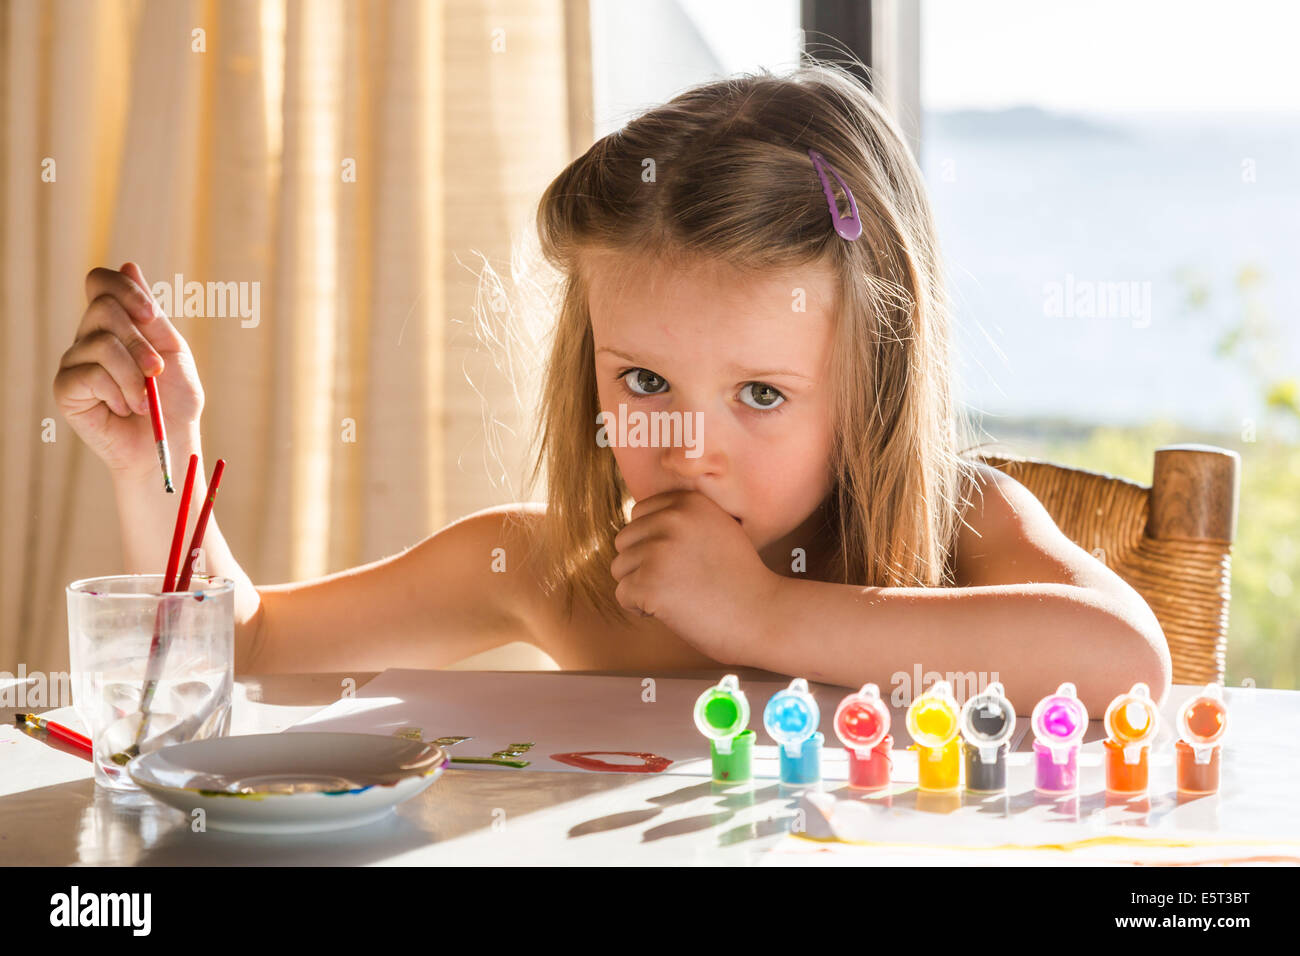 4 year old girl painting. Stock Photo